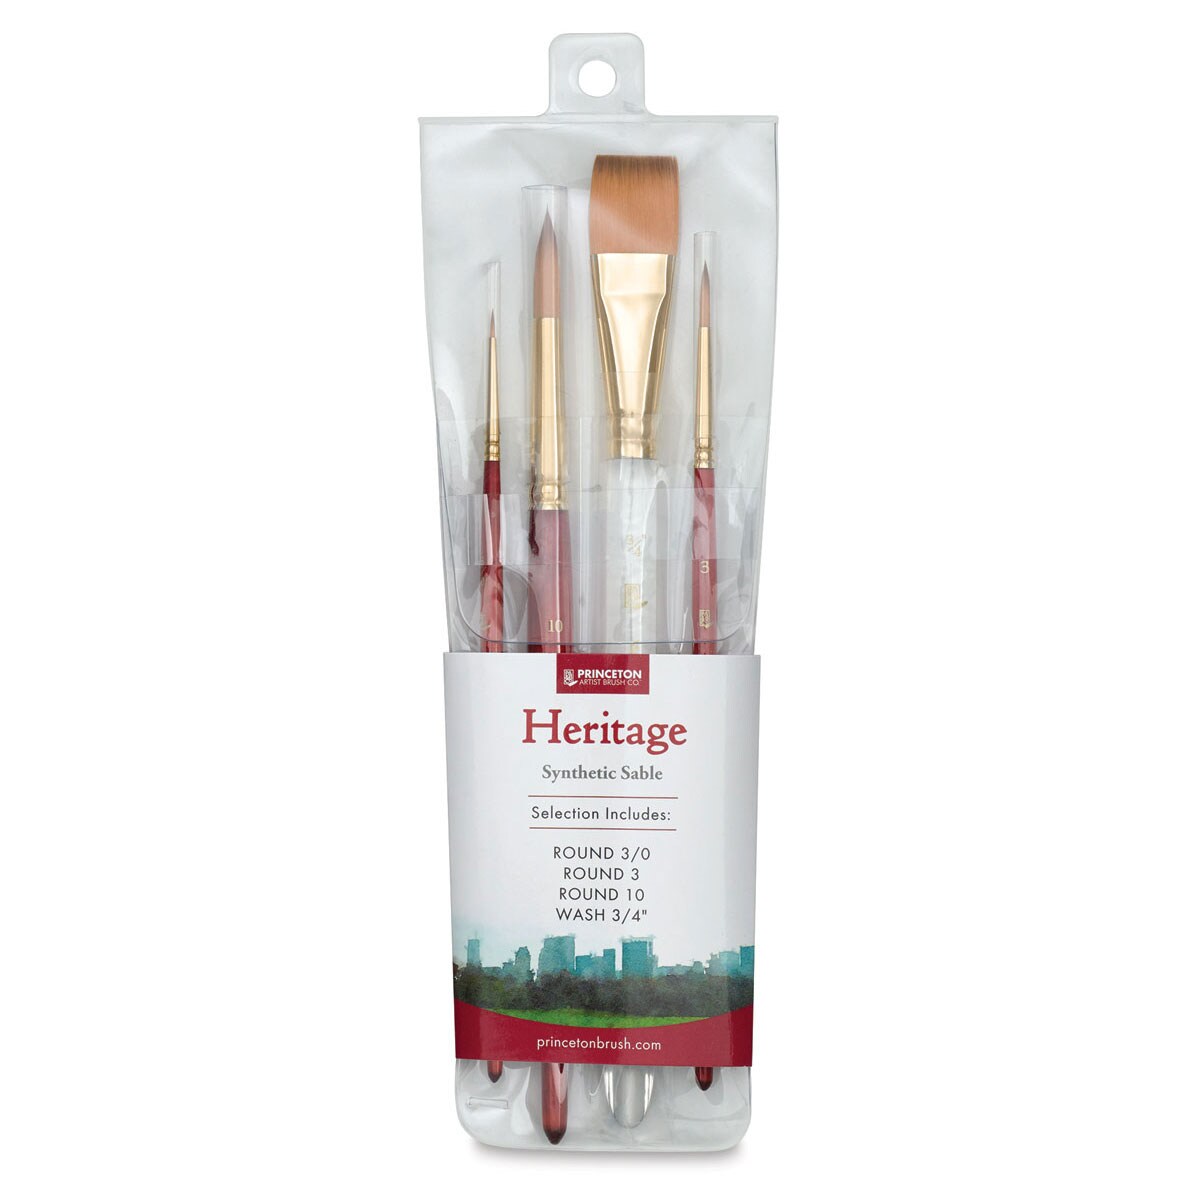 Princeton Pro Series 4000 Heritage Synthetic Sable Brushes - Set of 4